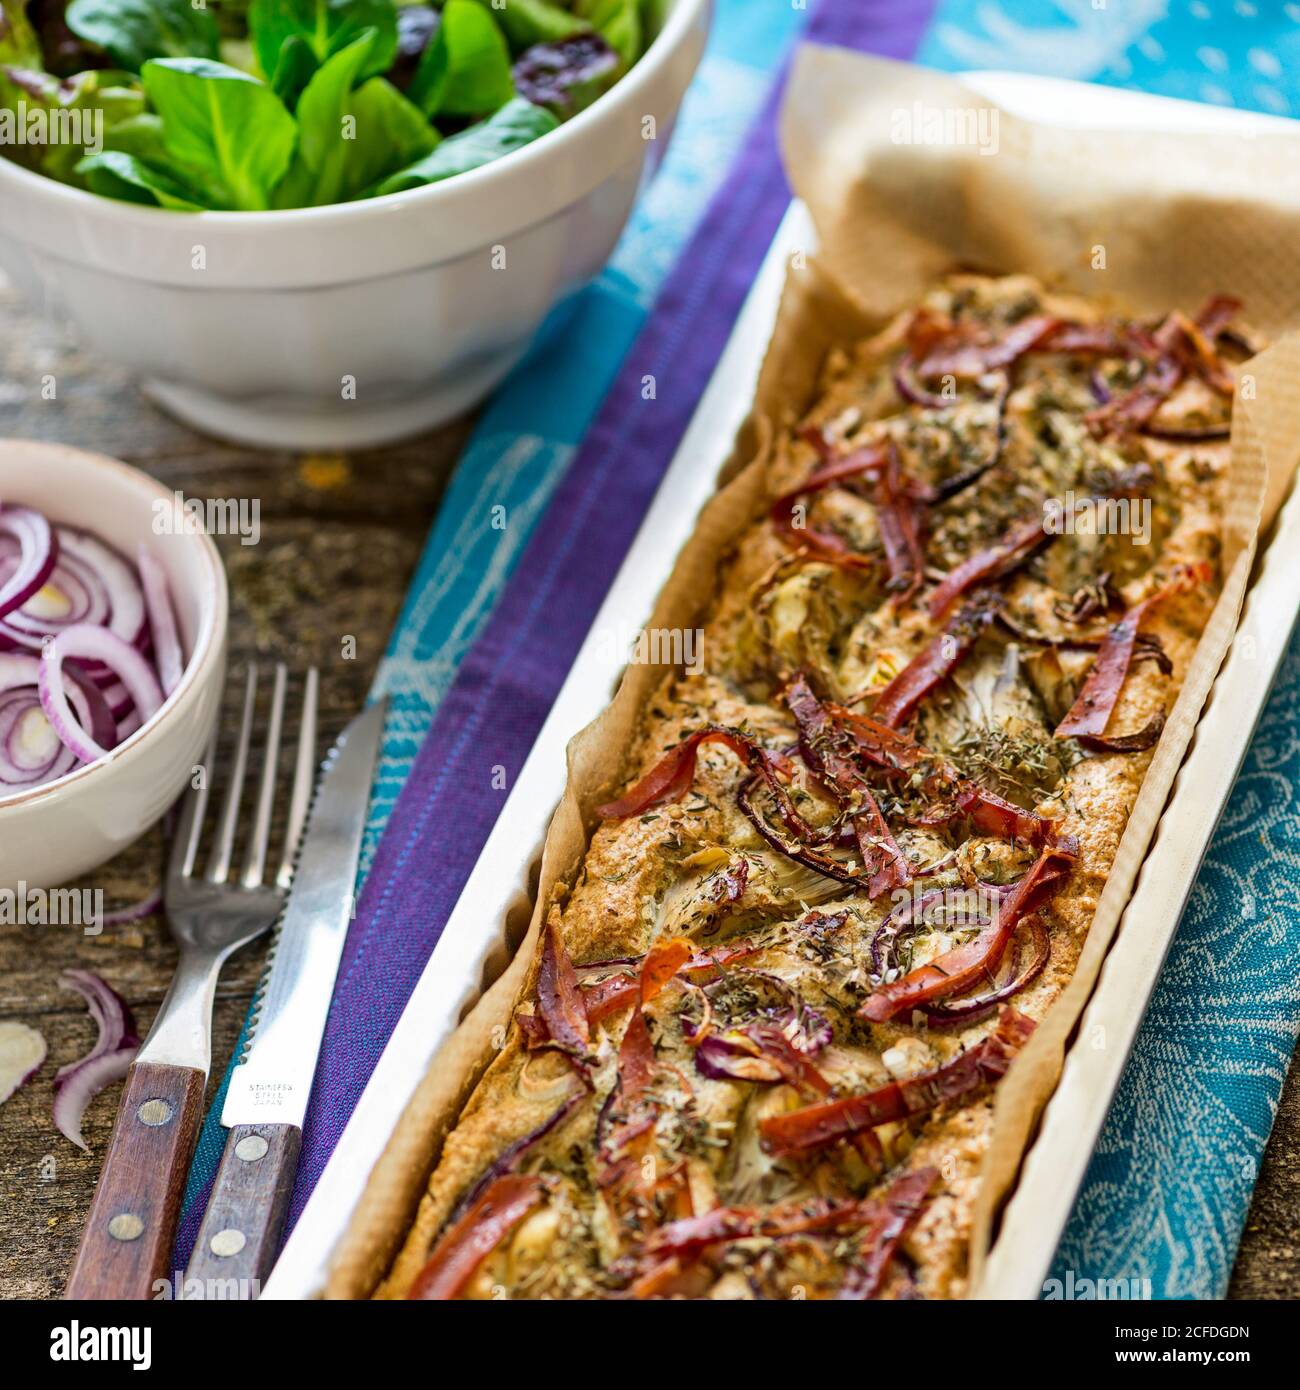 Foccacia fresh from the oven, in a rectangular tart pan, with green salad, extra red onions and artichokes Stock Photo